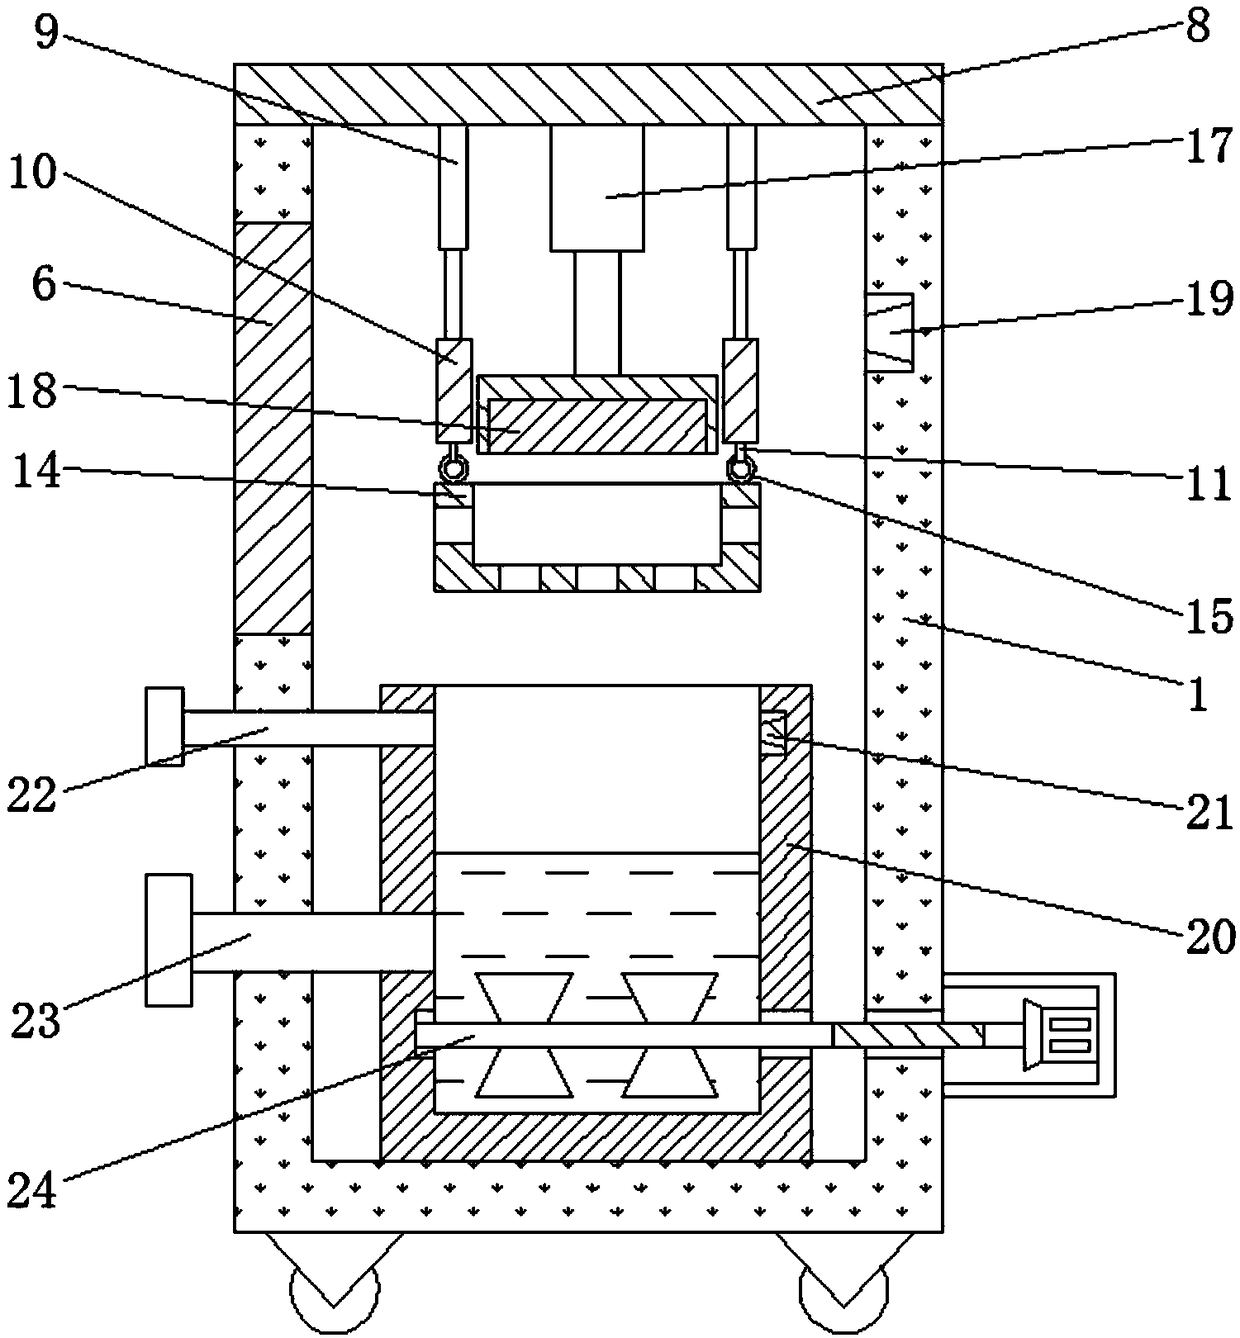 Quenching device with high safety performance for metal production